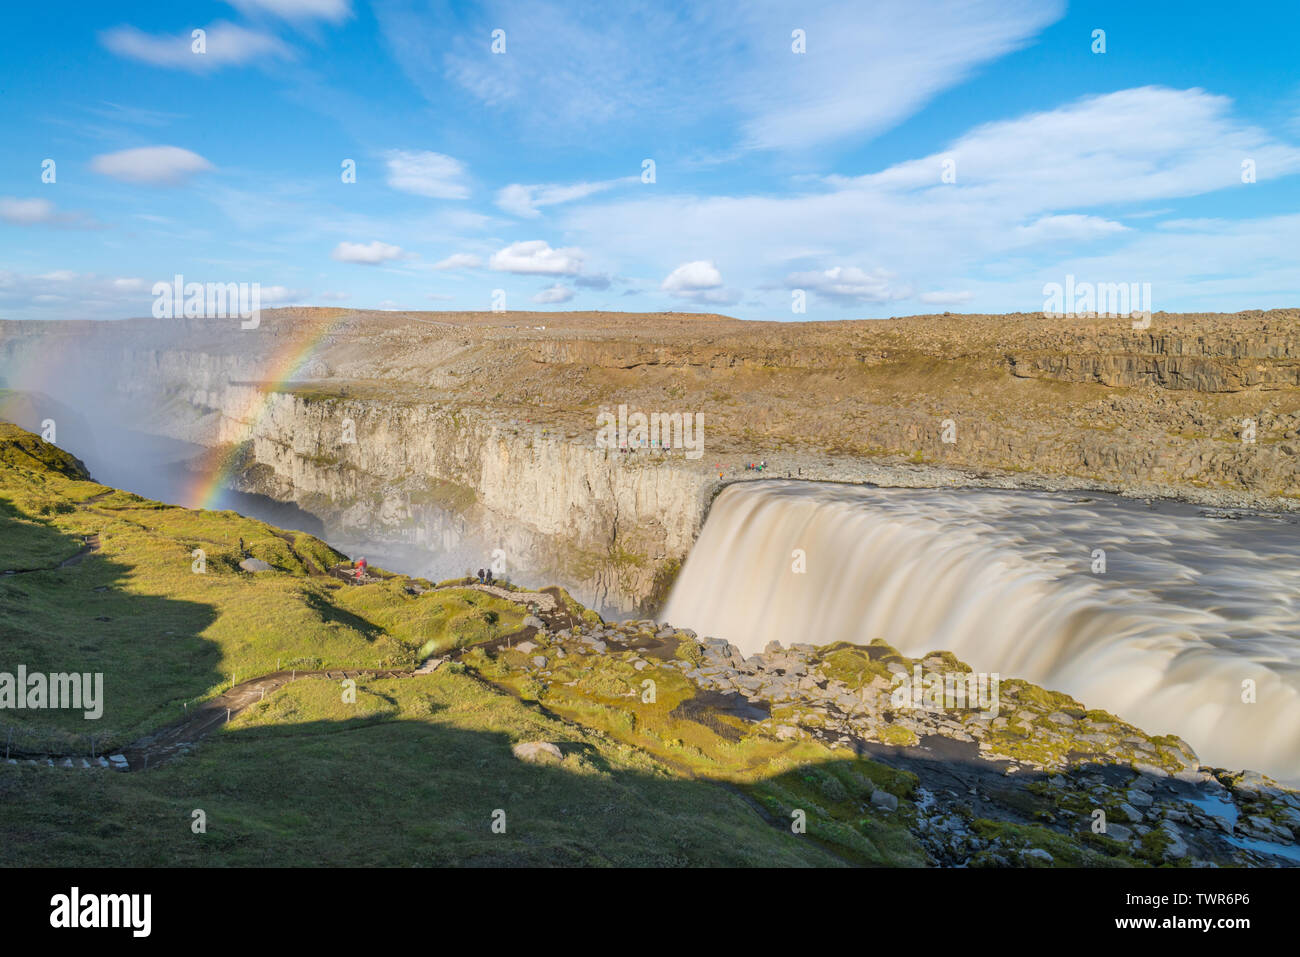 Long exposure of Dettifoss falls in Iceland. Famous tourist attraction Dettifoss, powerful waterfall and deep canyon covered in mist and rainbow. Stock Photo